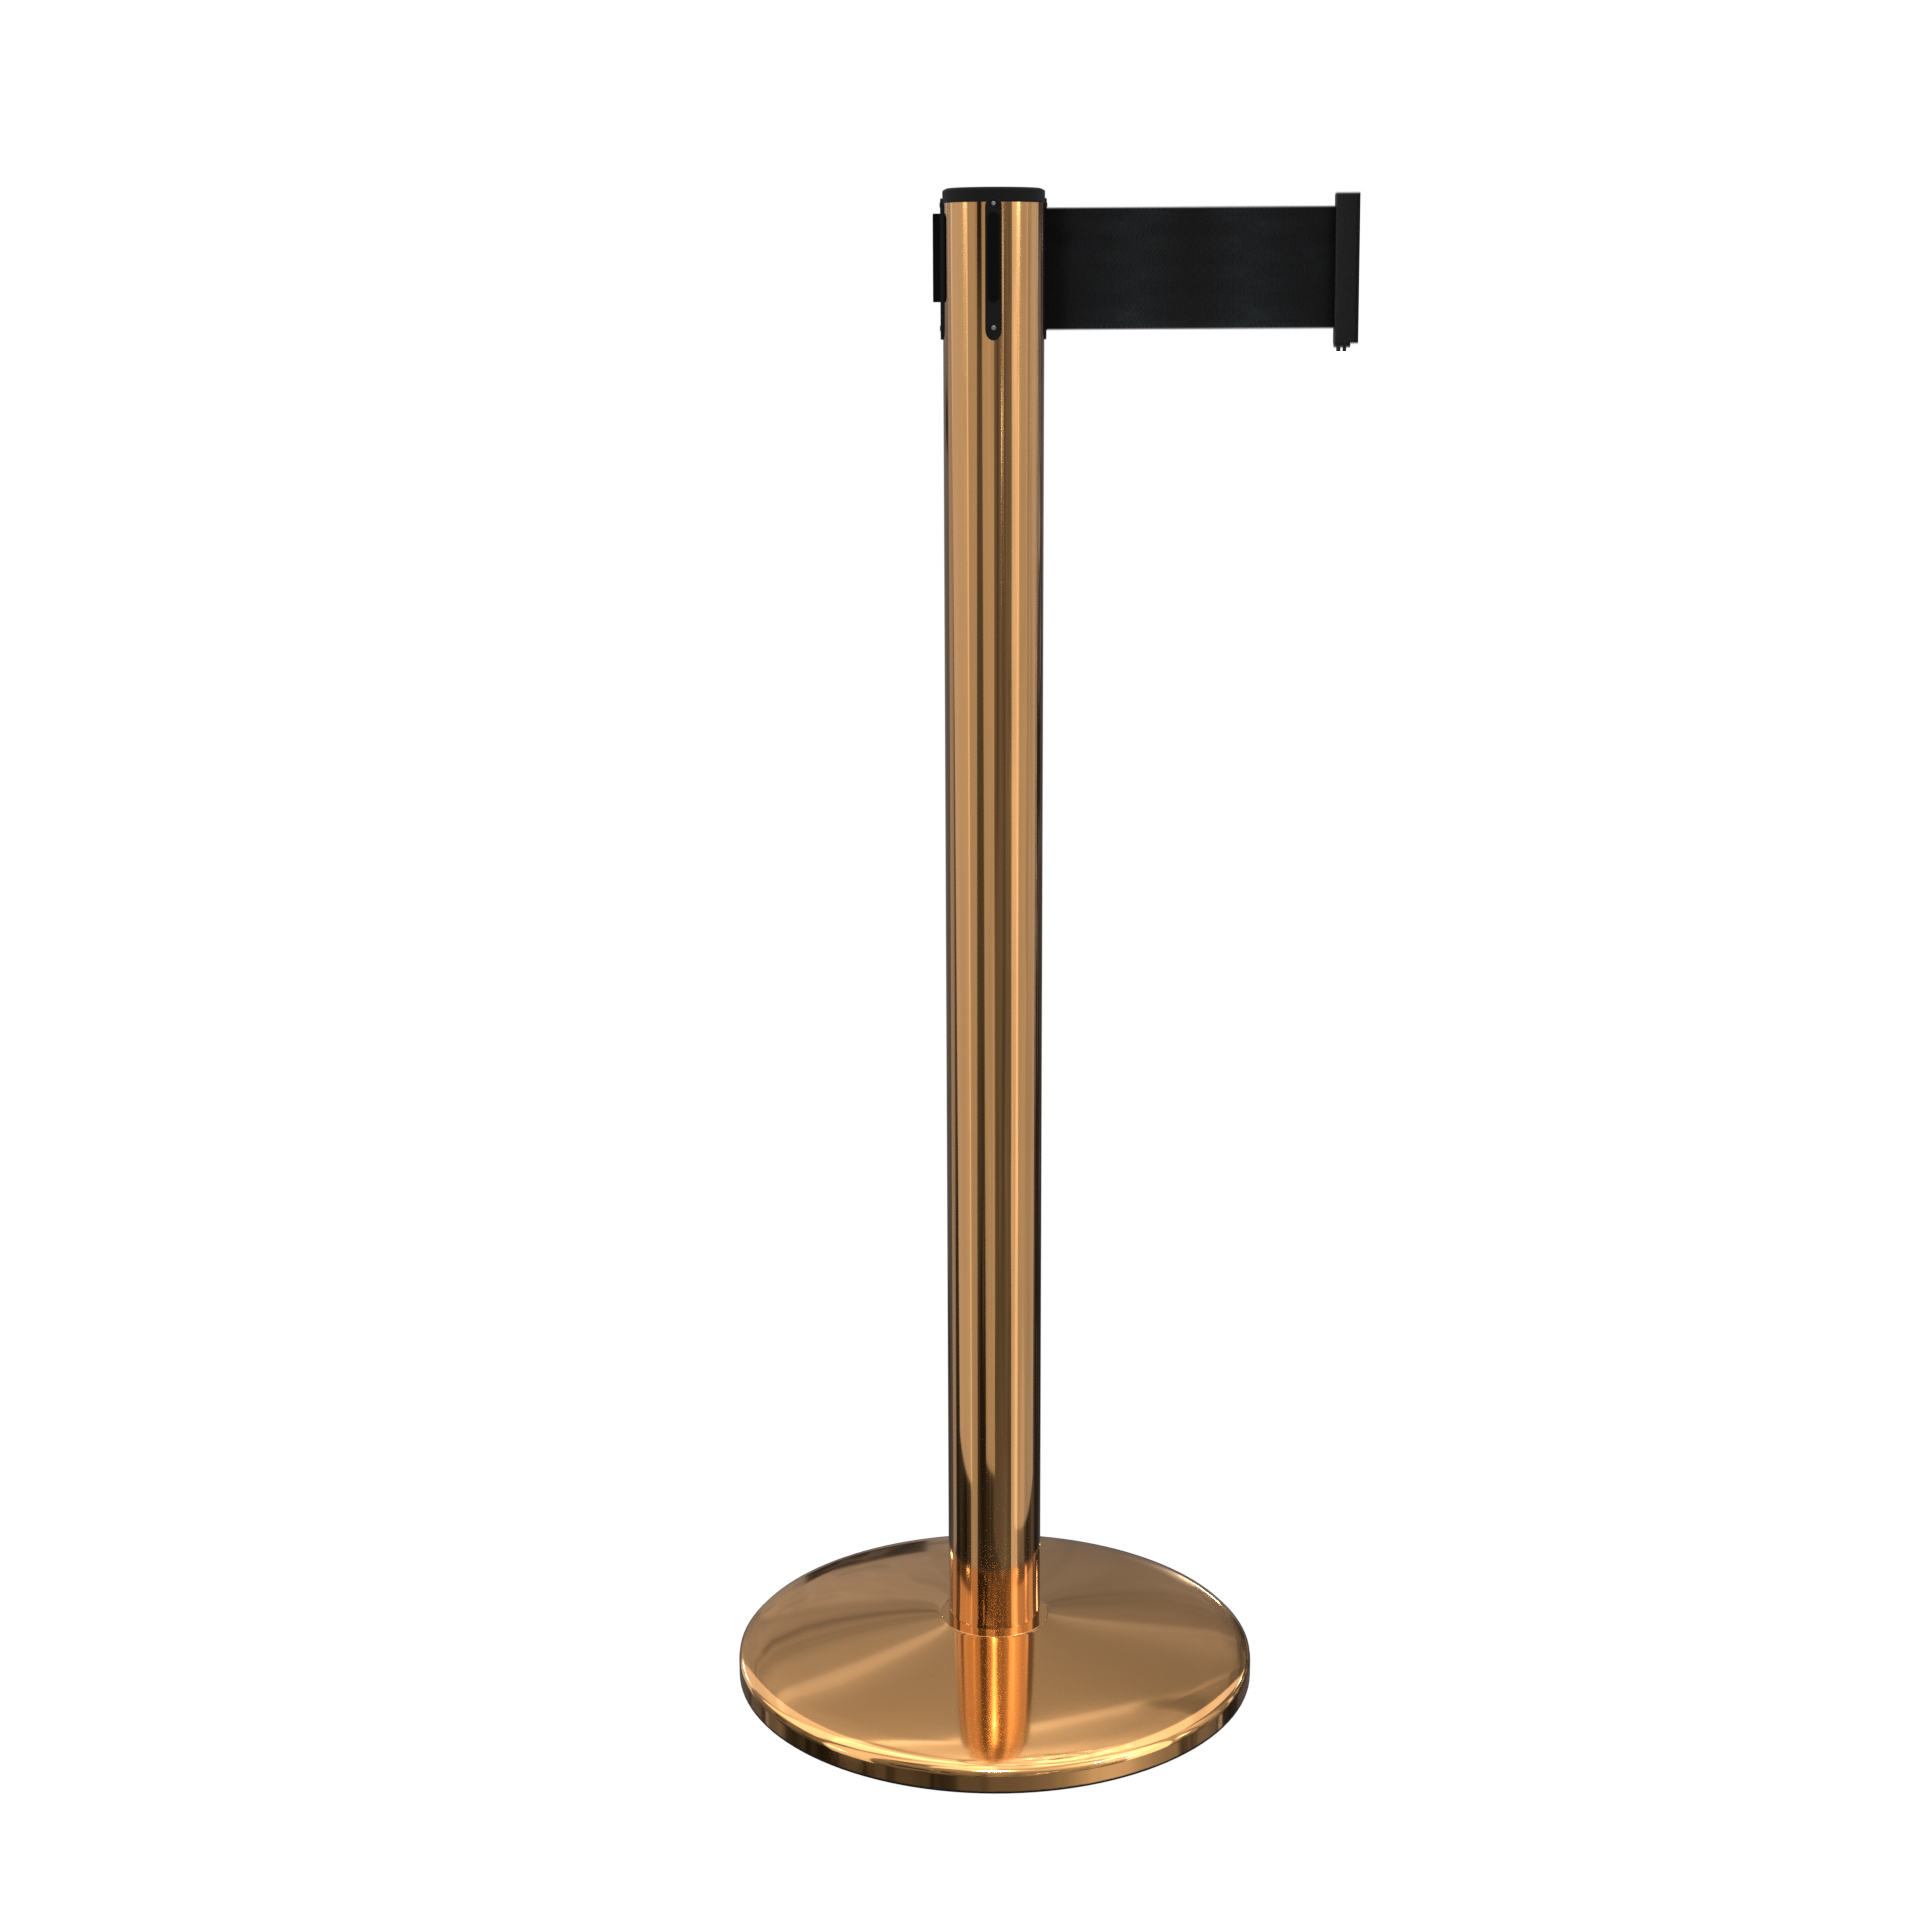 Polished Brass QueuePro 250 Retractable Belt Barrier with a 3 Inch Belt